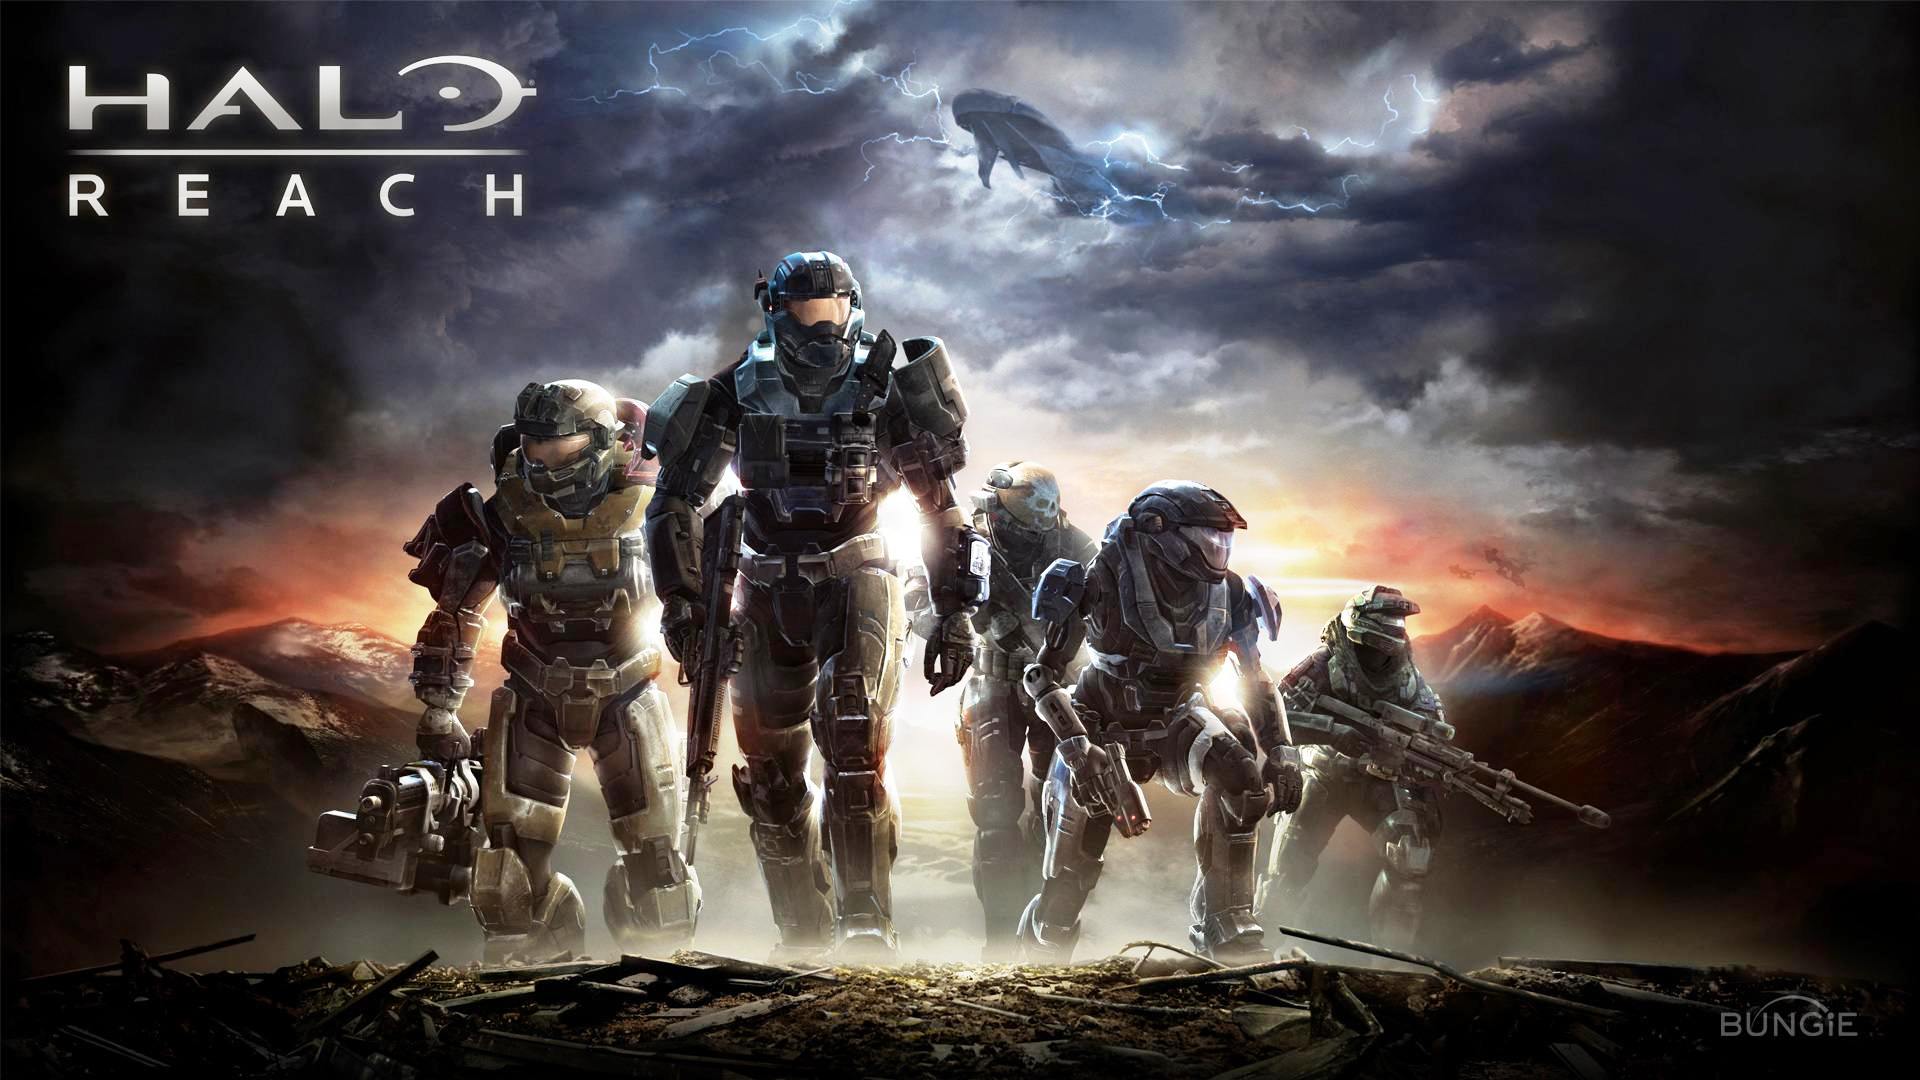 Halo Reach - Xbox 360 Game - image 2 of 5